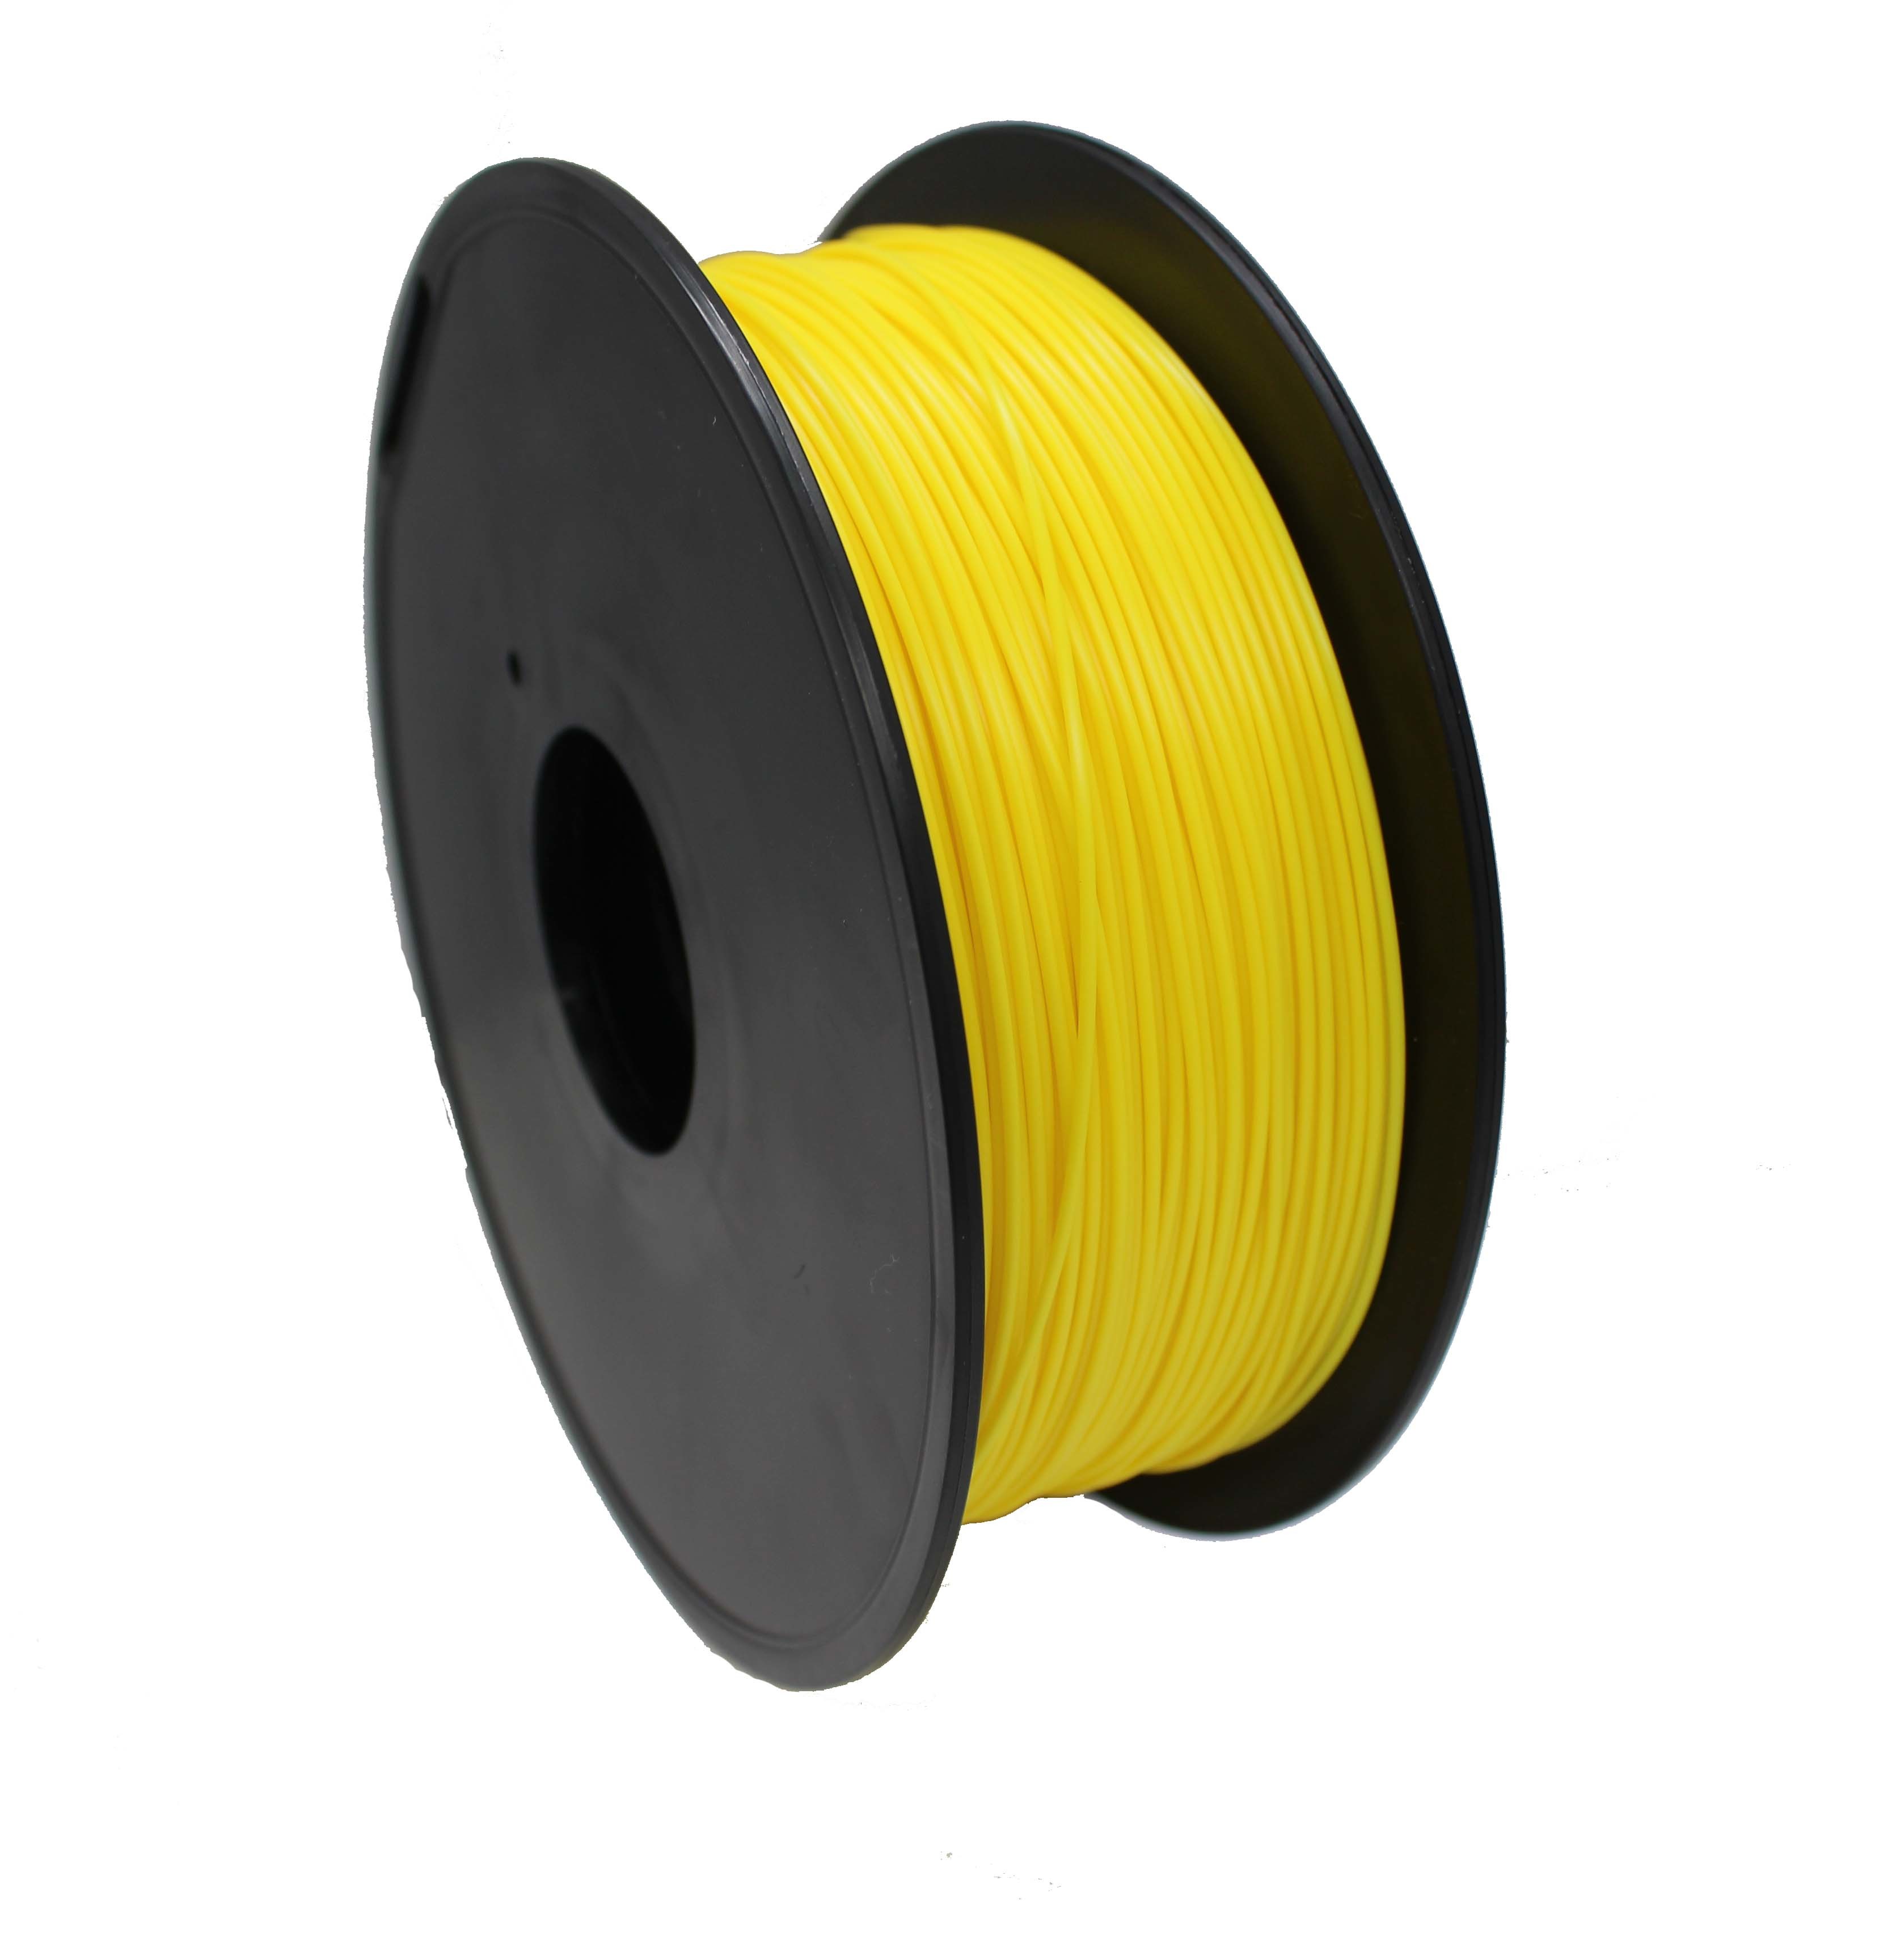 China Wholesale Price 1.75mm abs/pla 3D Printer Filament for 3D Printer US $7-16  / Roll on sale